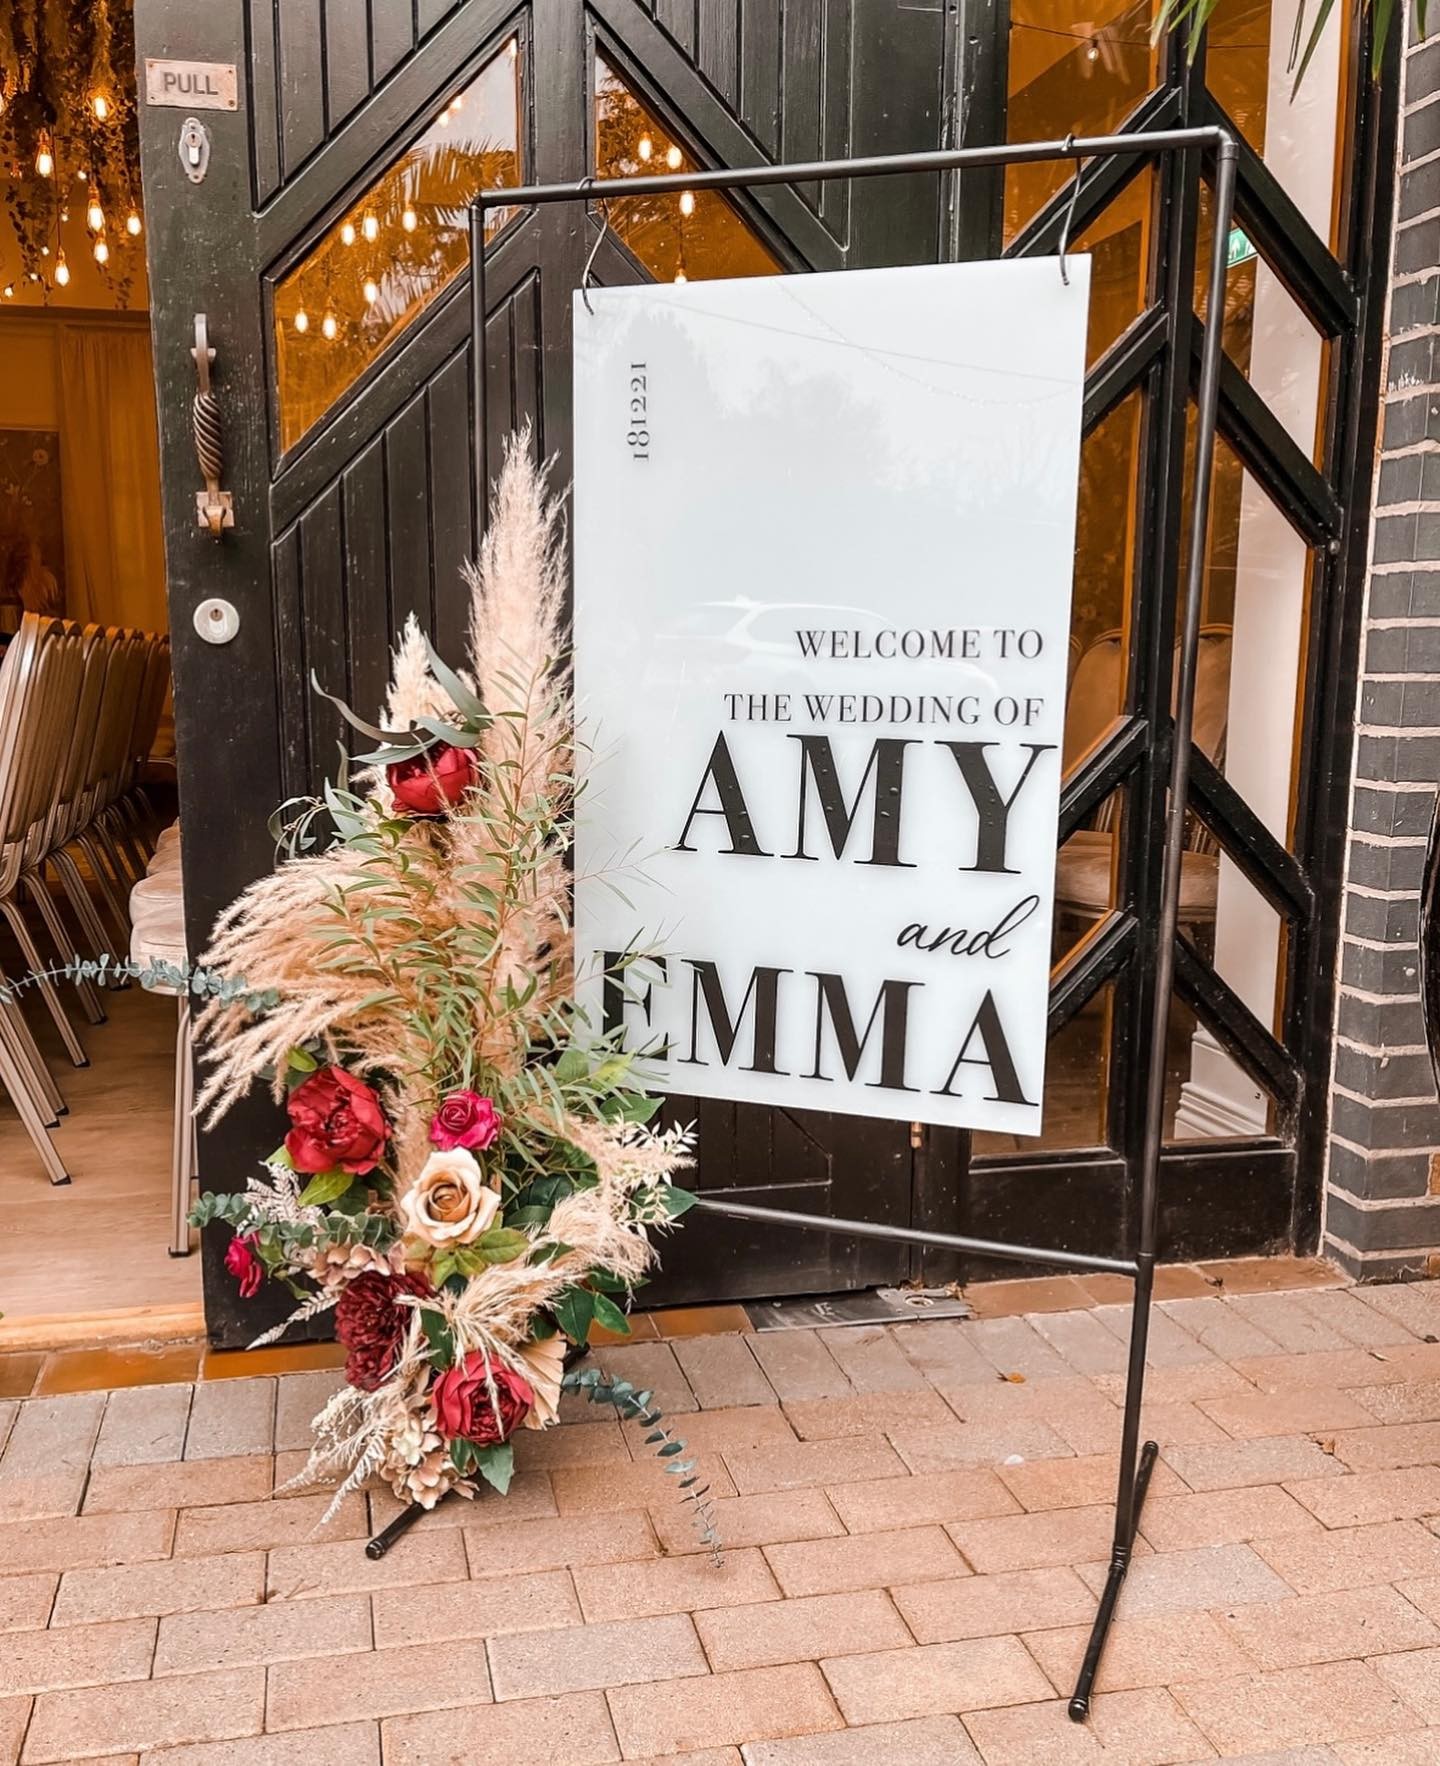 This is a chic and contemporary wedding sign. The monochrome design complements the bright and vibrant flowers perfectly.